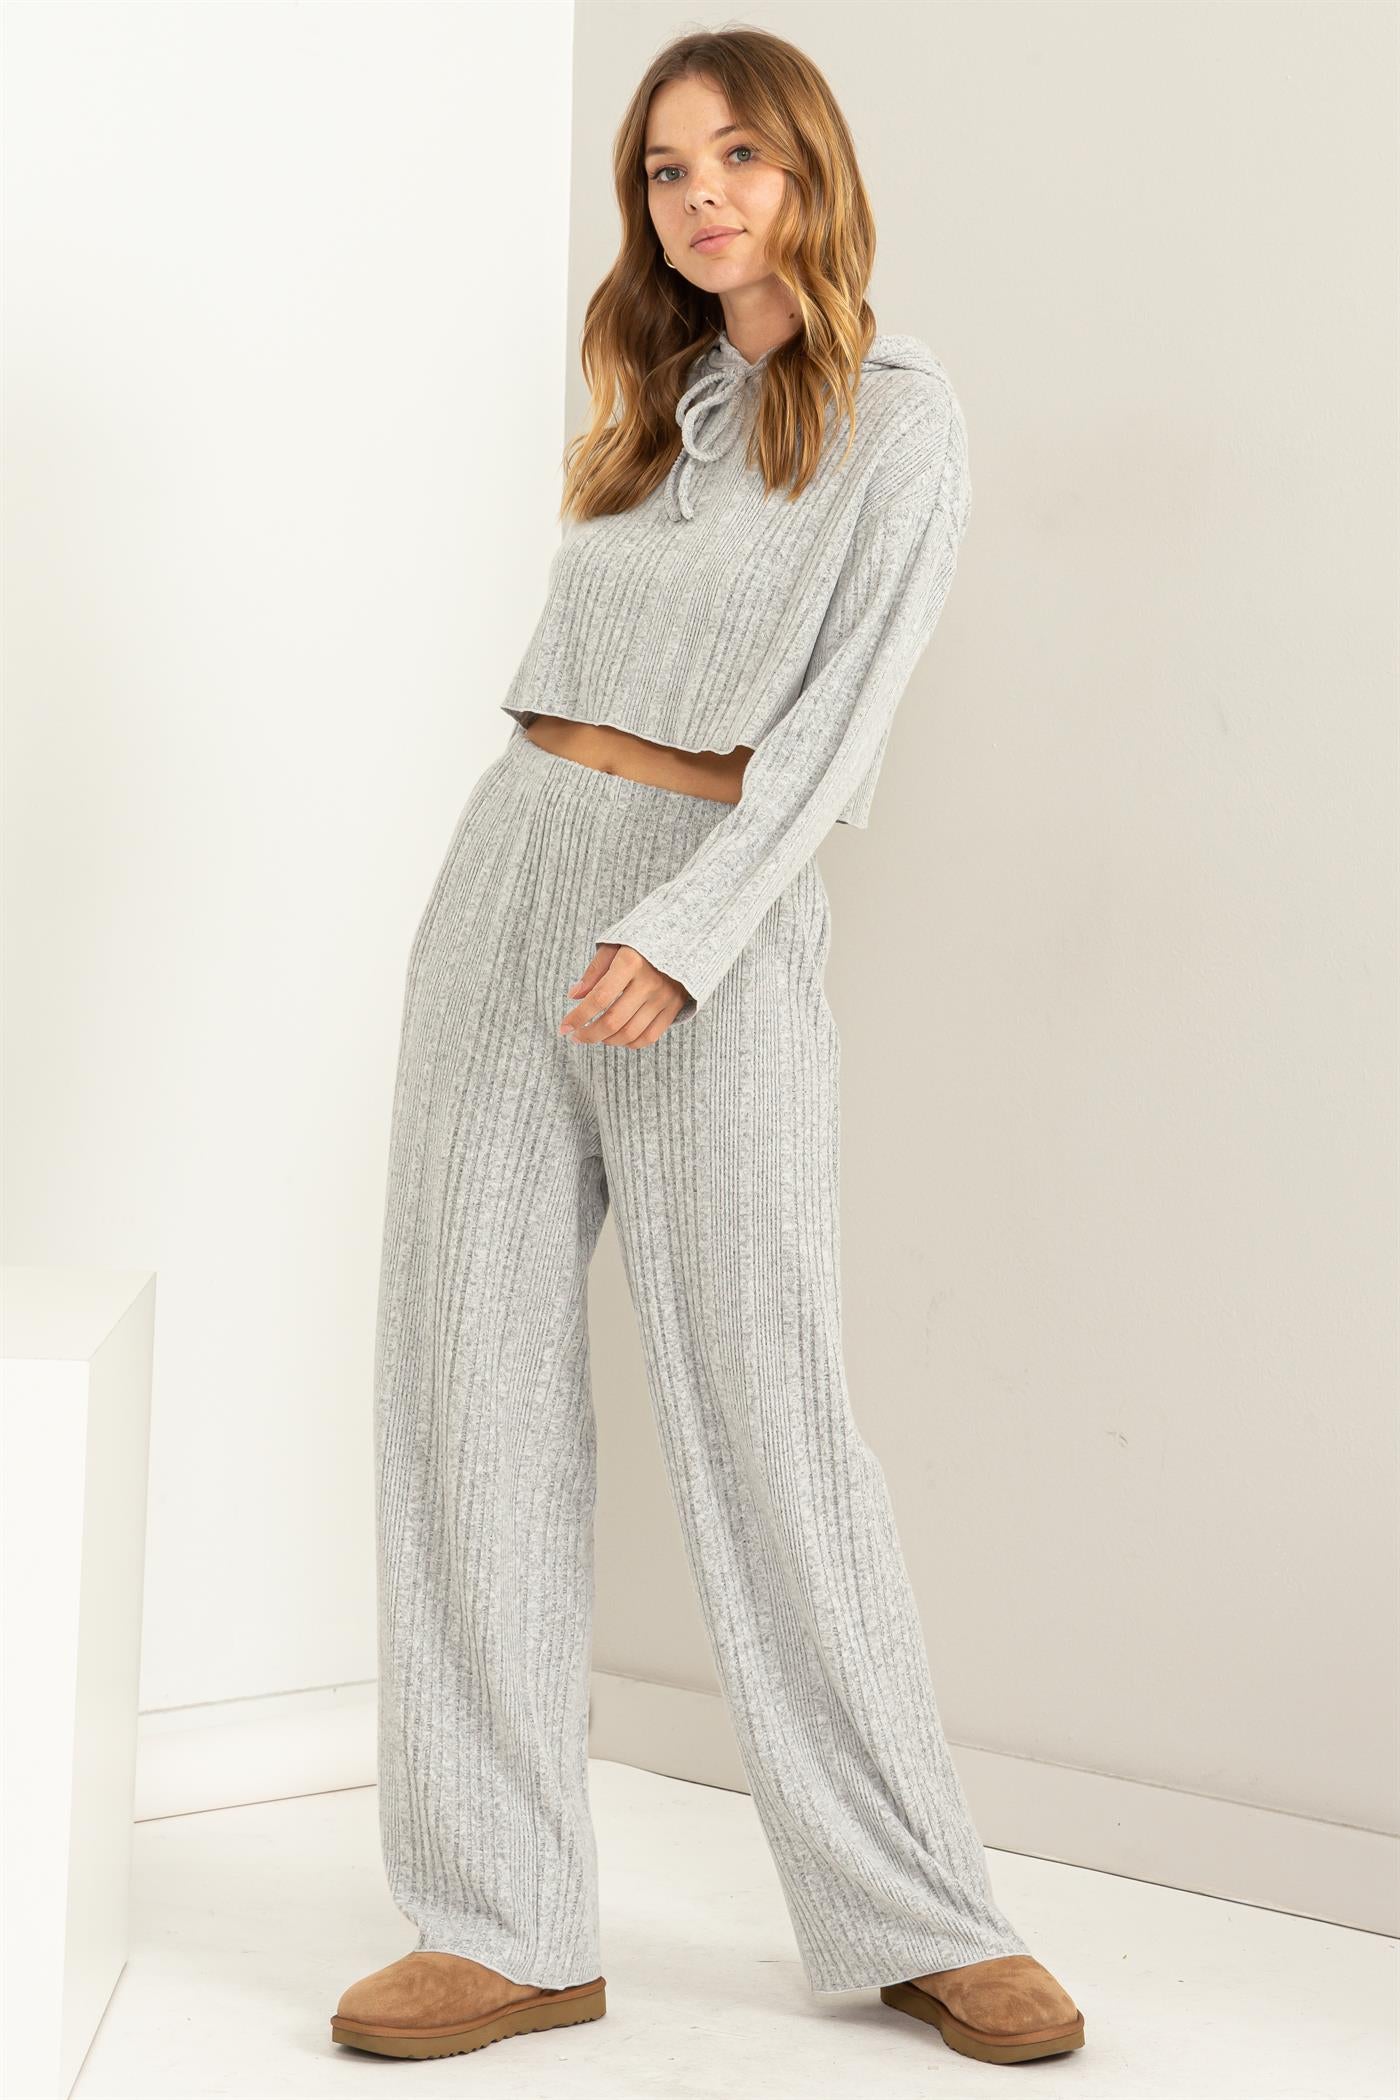 So Dreamy Ribbed Knit Hoodie and Pants Two-Piece Set